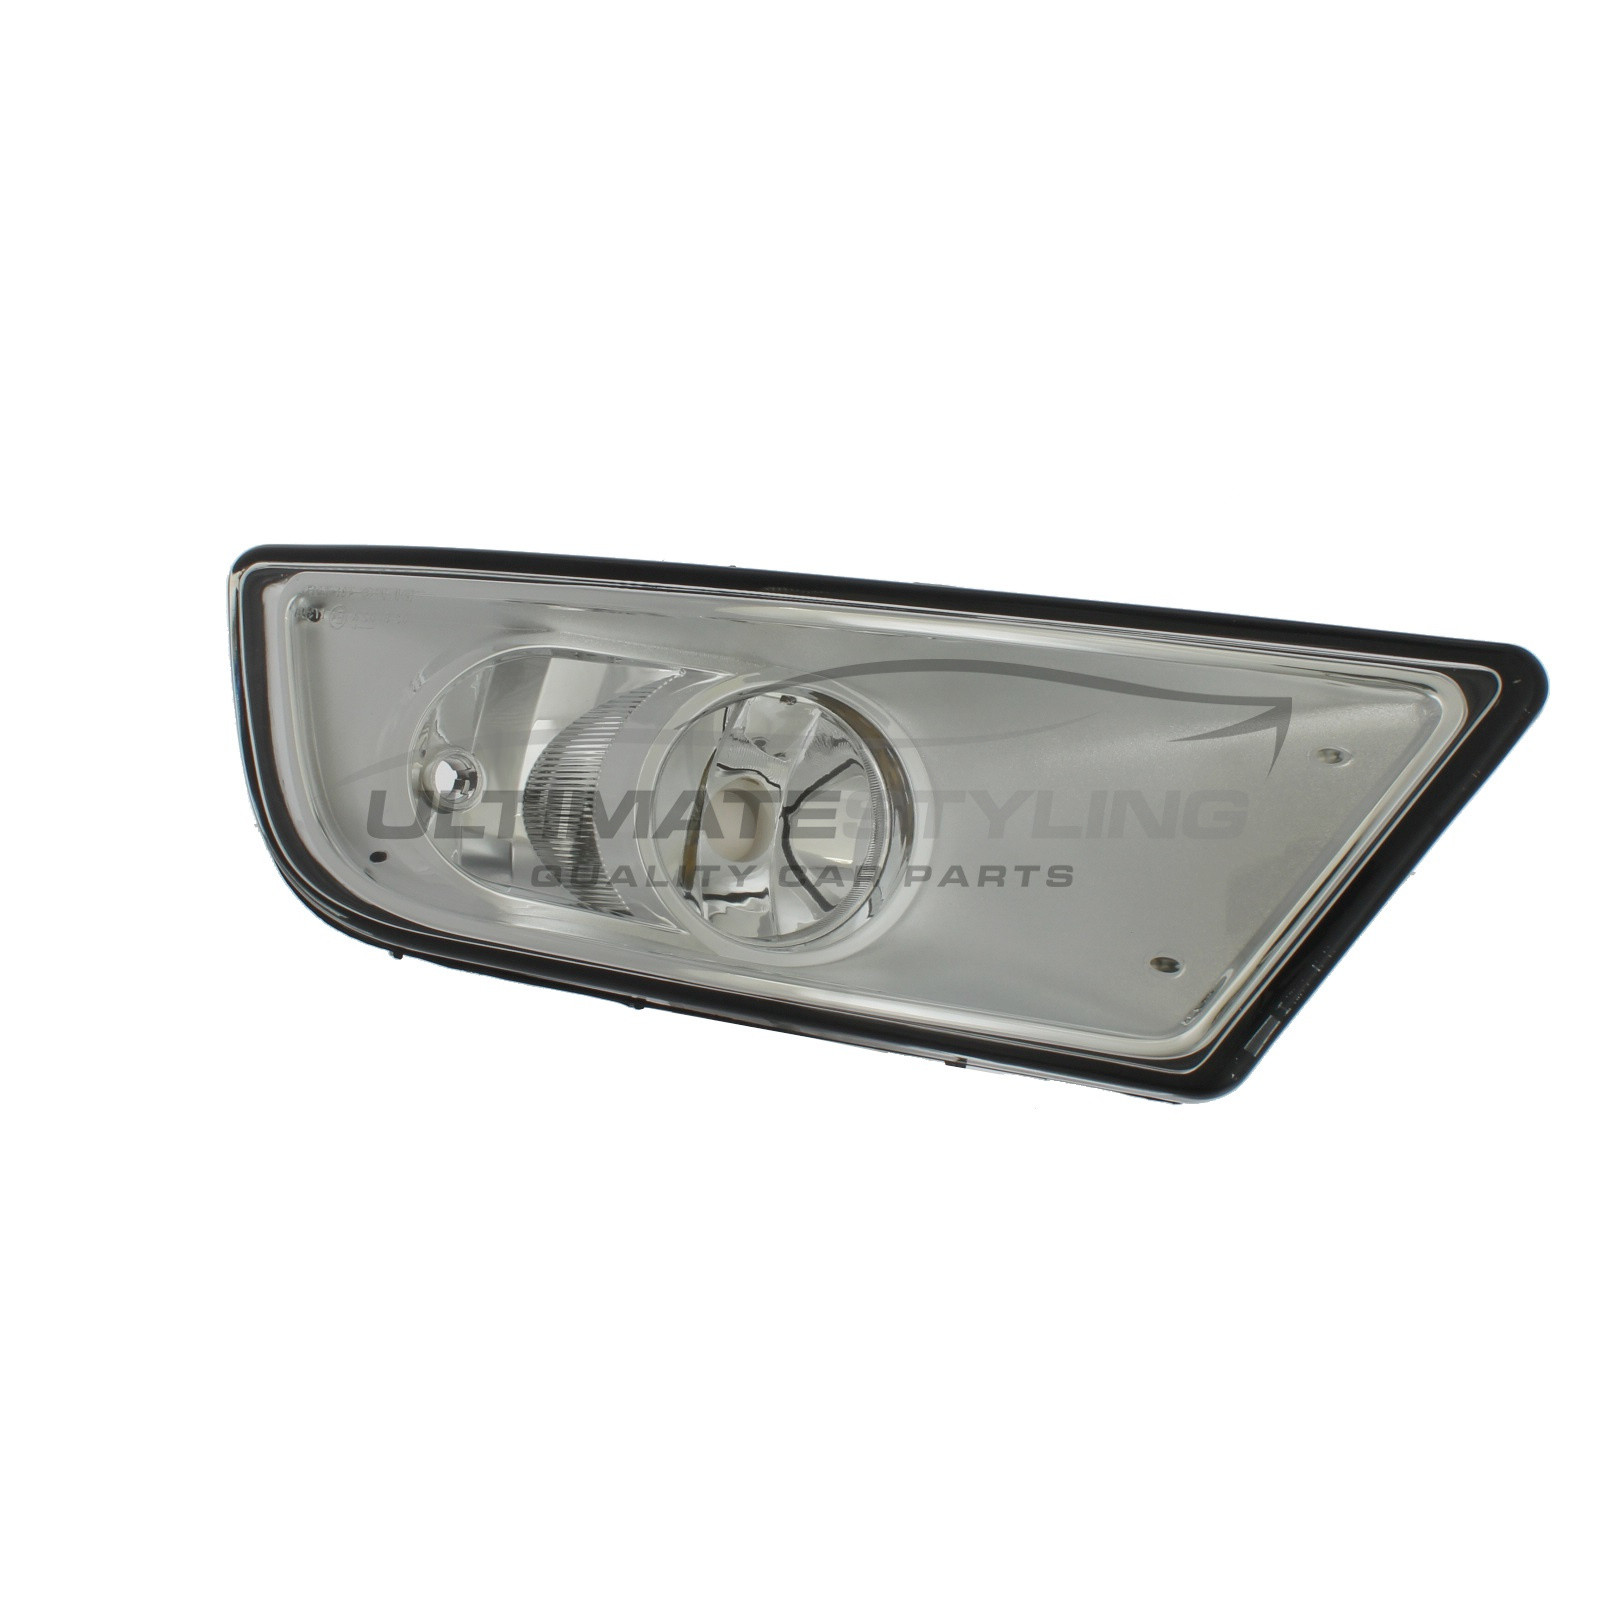 Front Fog Lamp & Side Lamp for Ford Galaxy